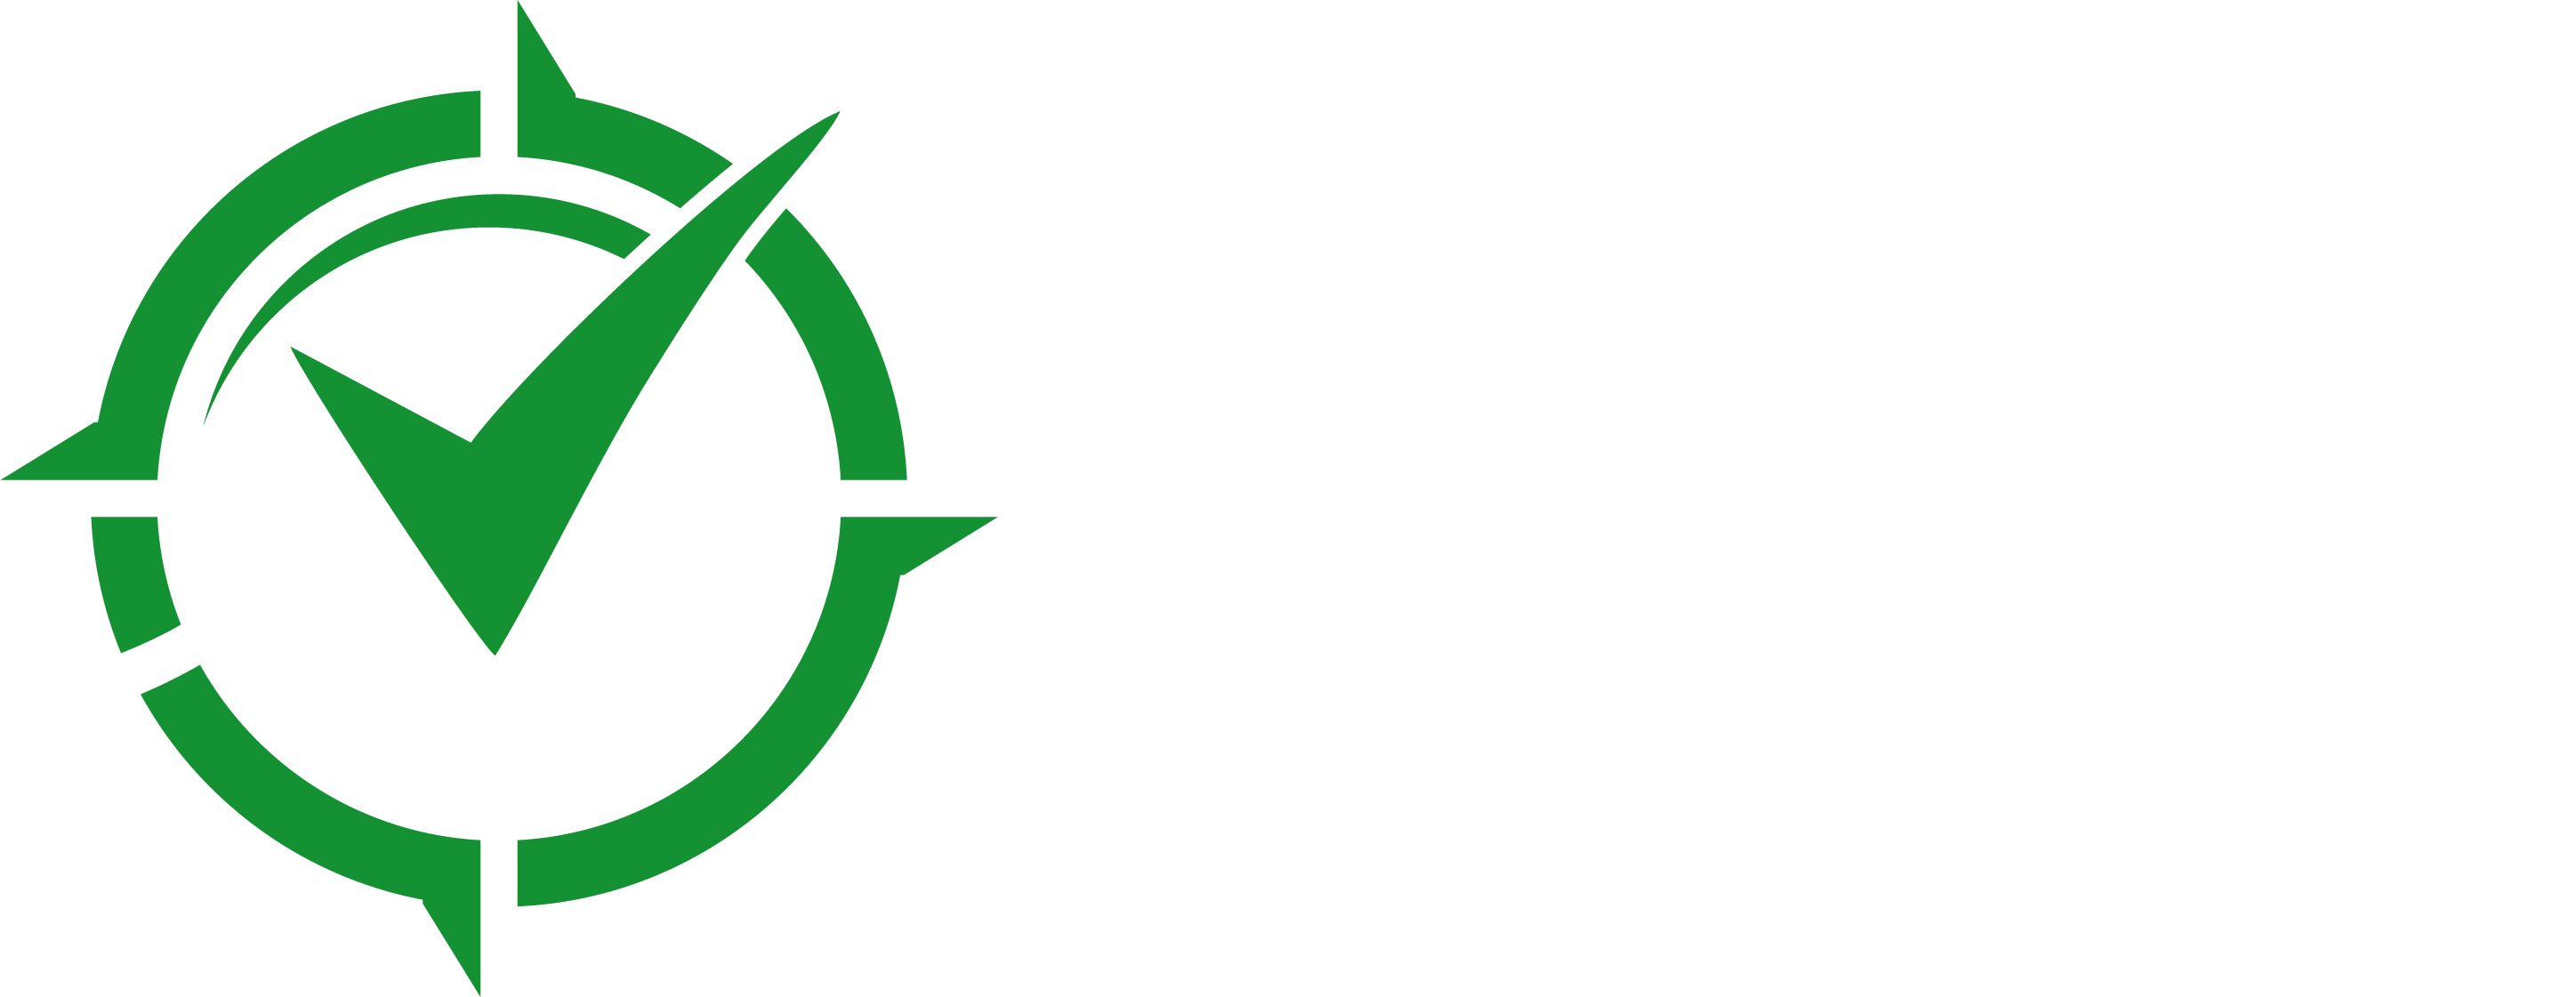 Pest Control Weekly